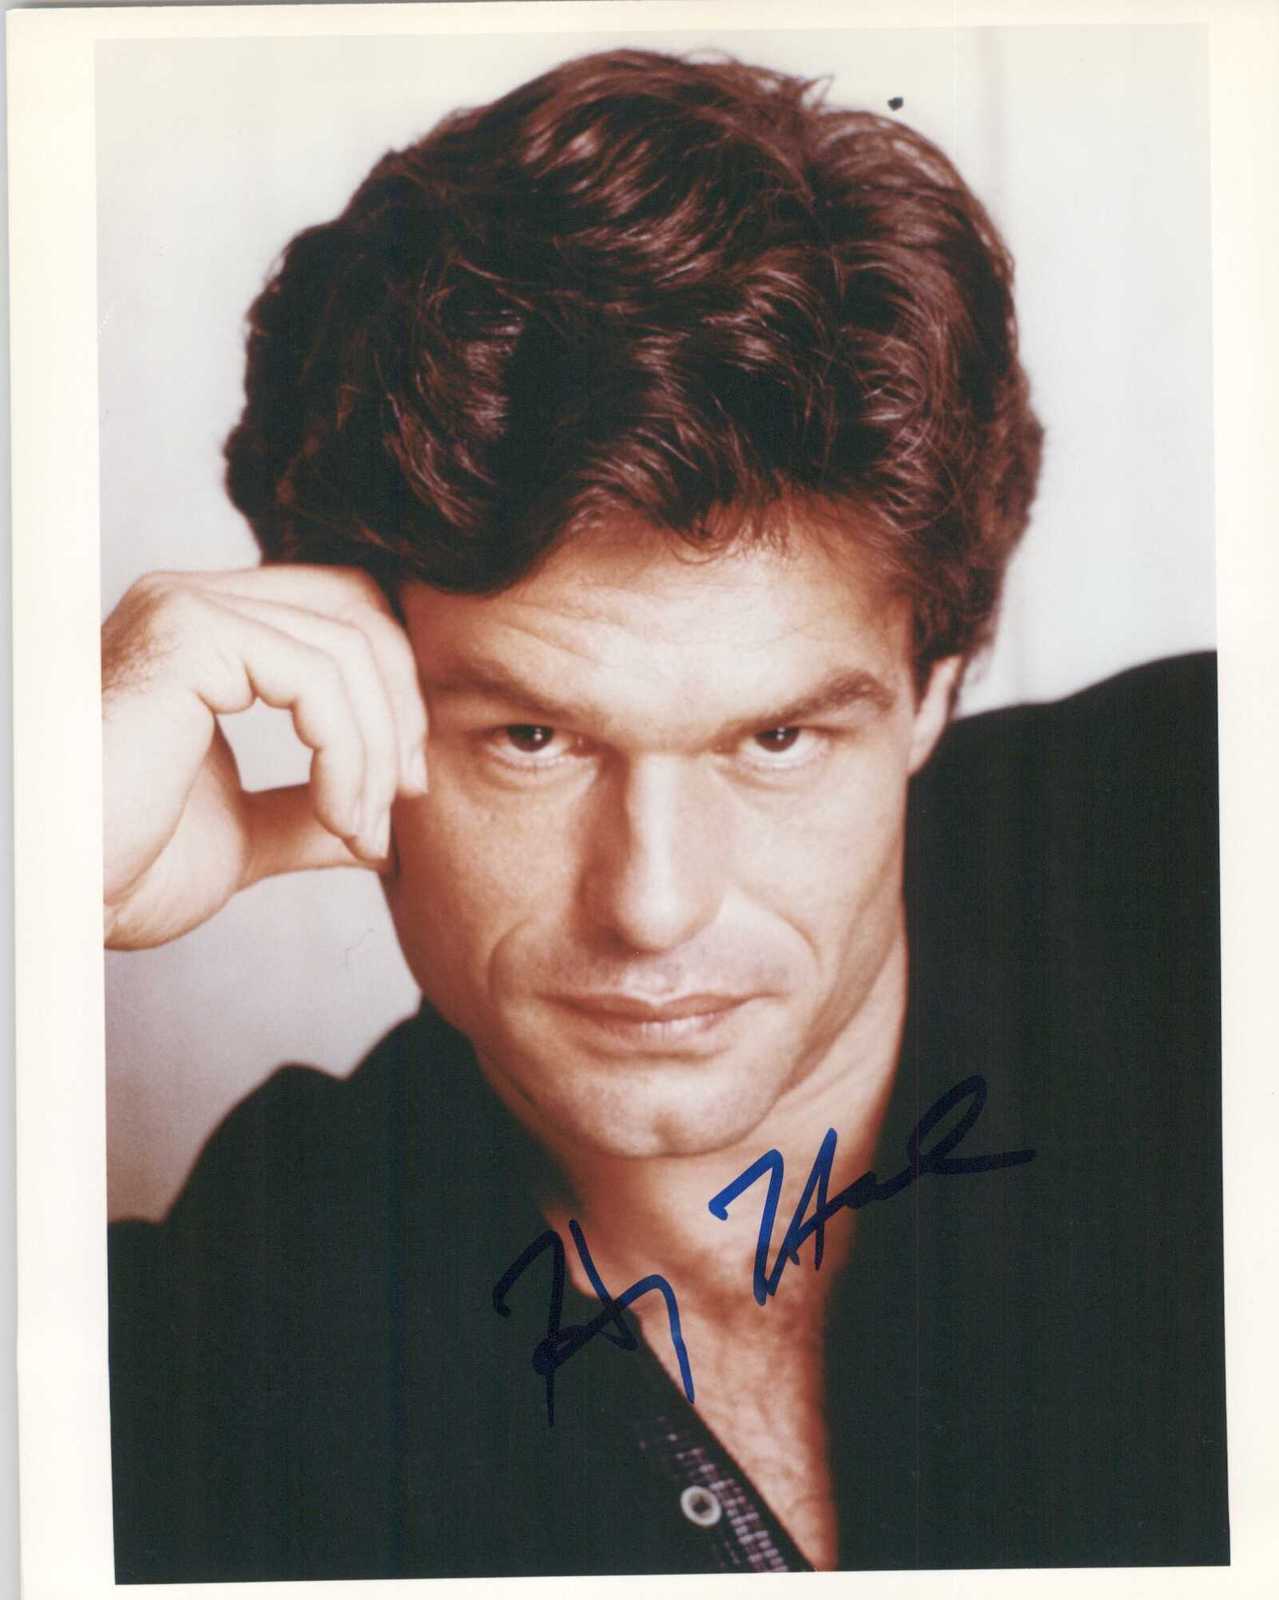 Primary image for Harry Hamlin Signed Autographed Glossy 8x10 Photo